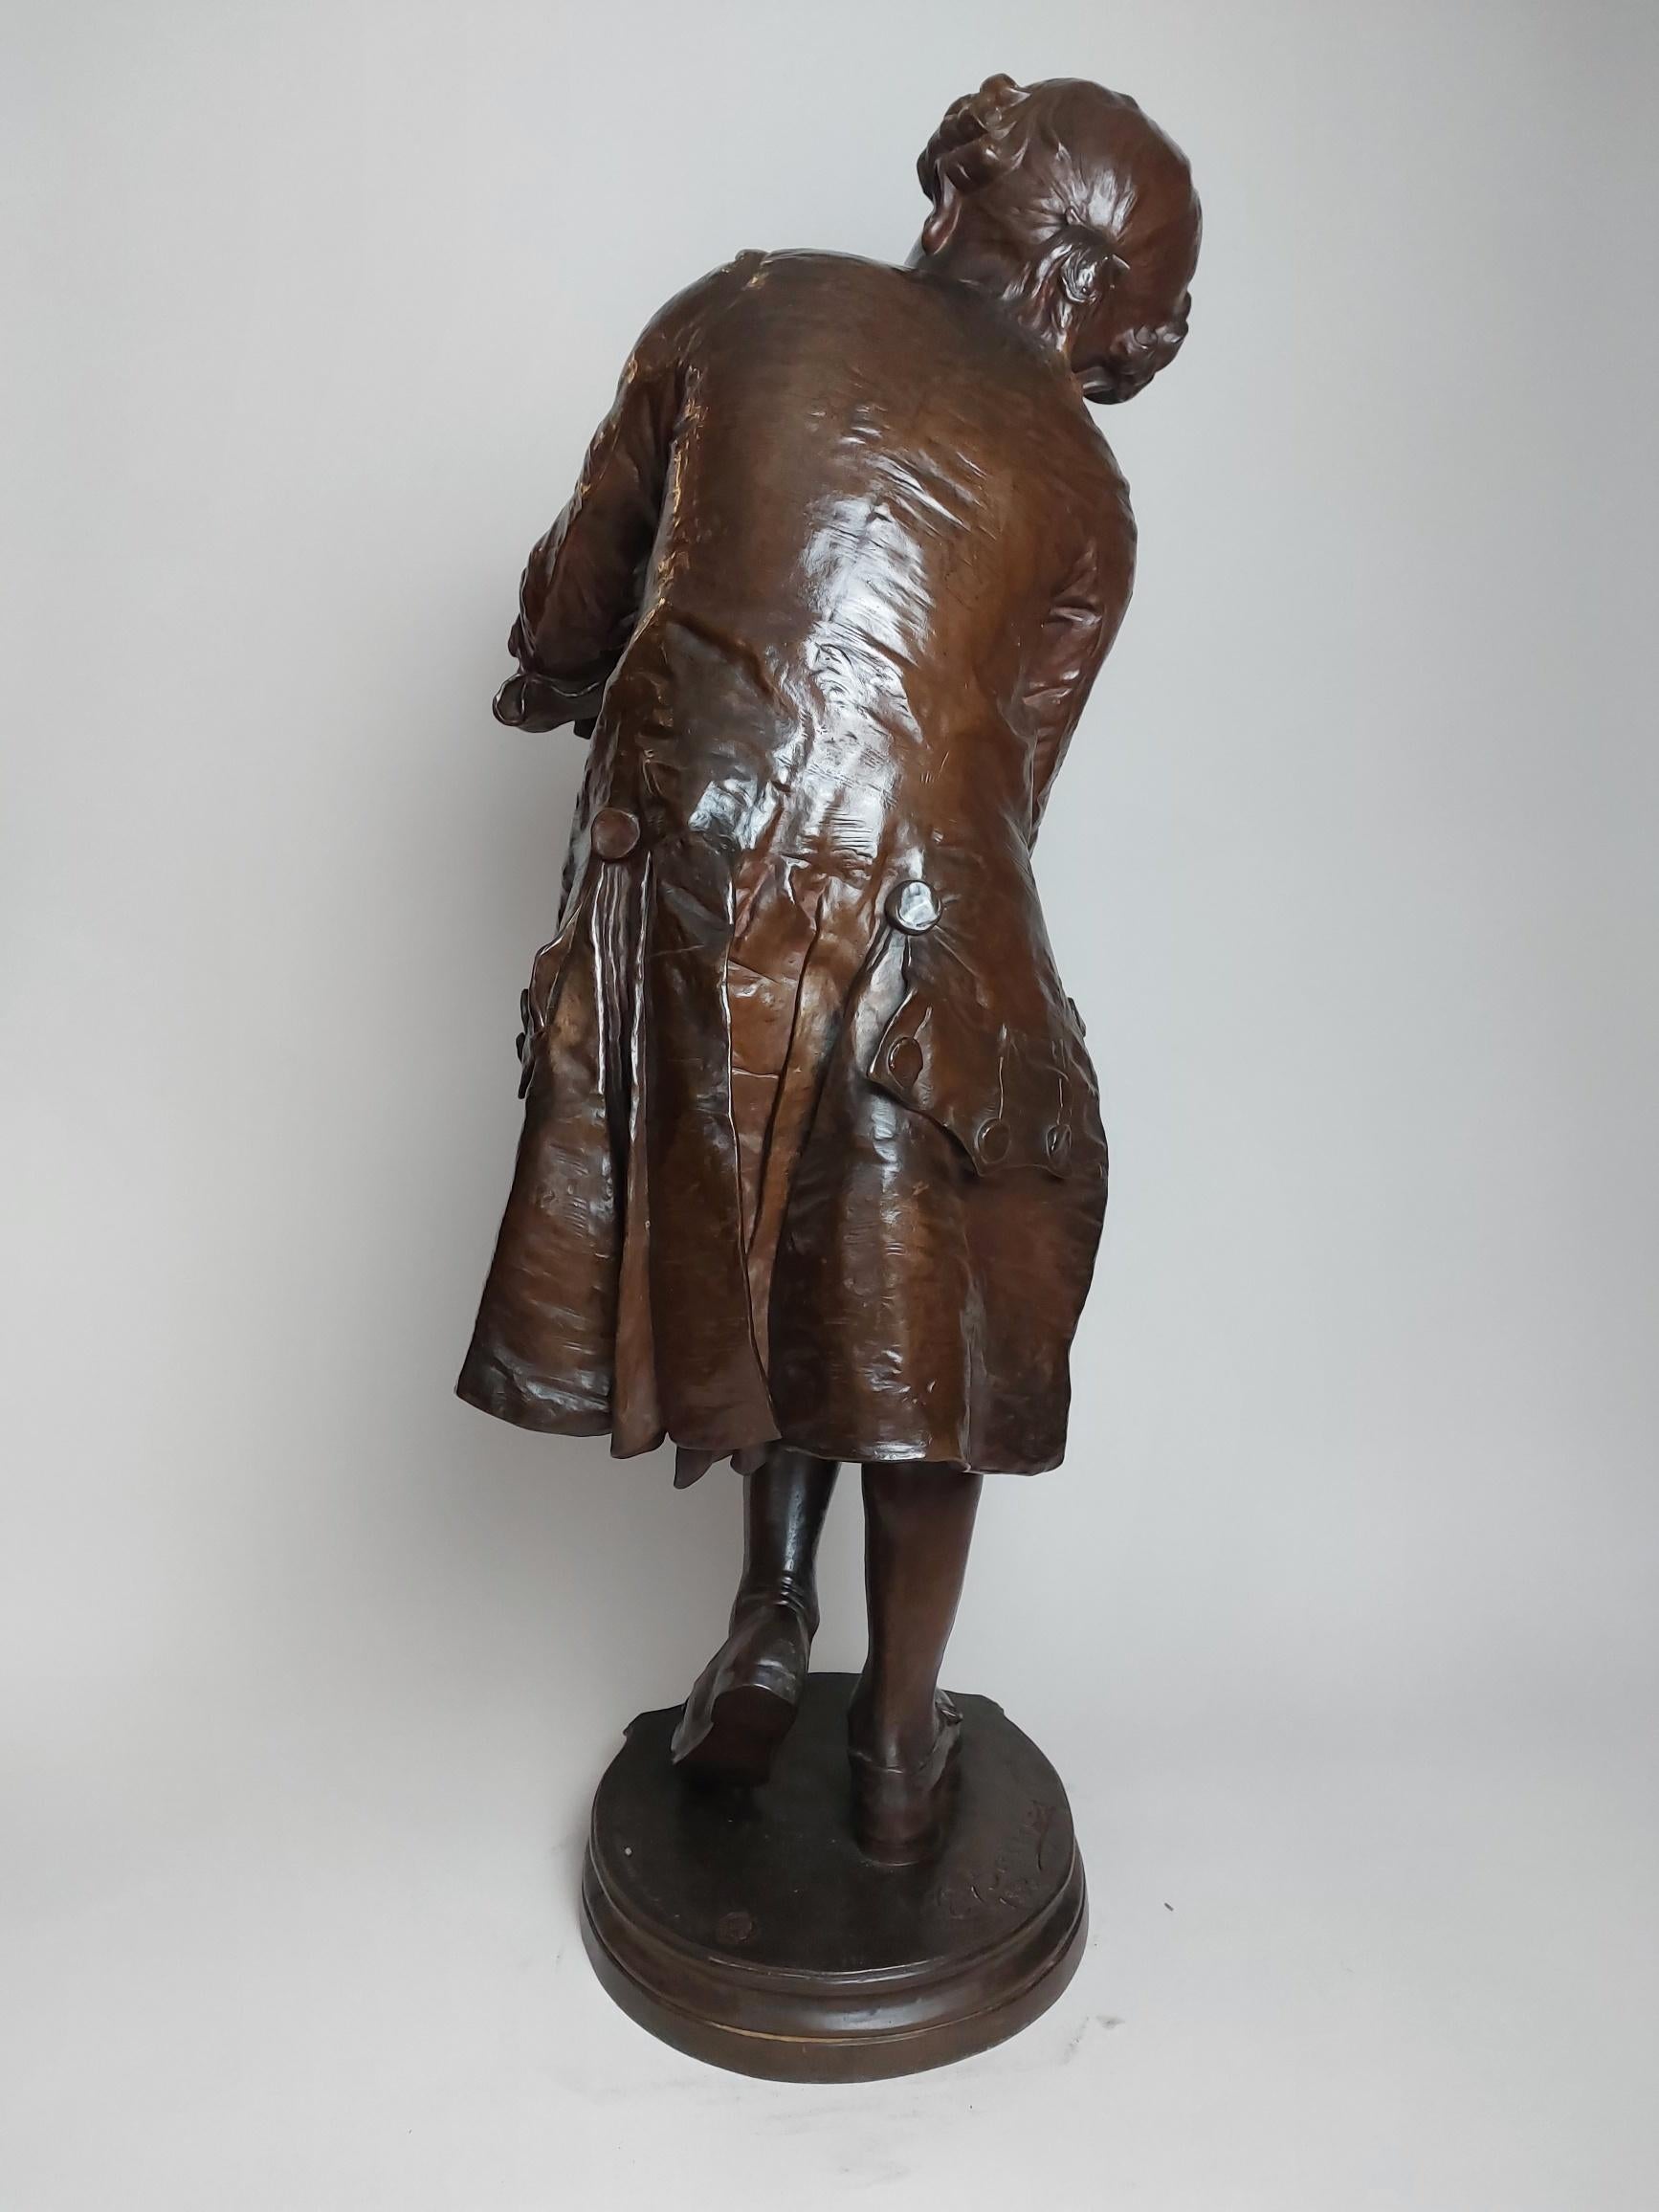 A charming 19th century French bronze of the Young Mozart tuning his violin on his knee.

This is a very popular bronze with many versions in various sizes cast, this is particularly good casting in a large size.
The same model of bronze in the